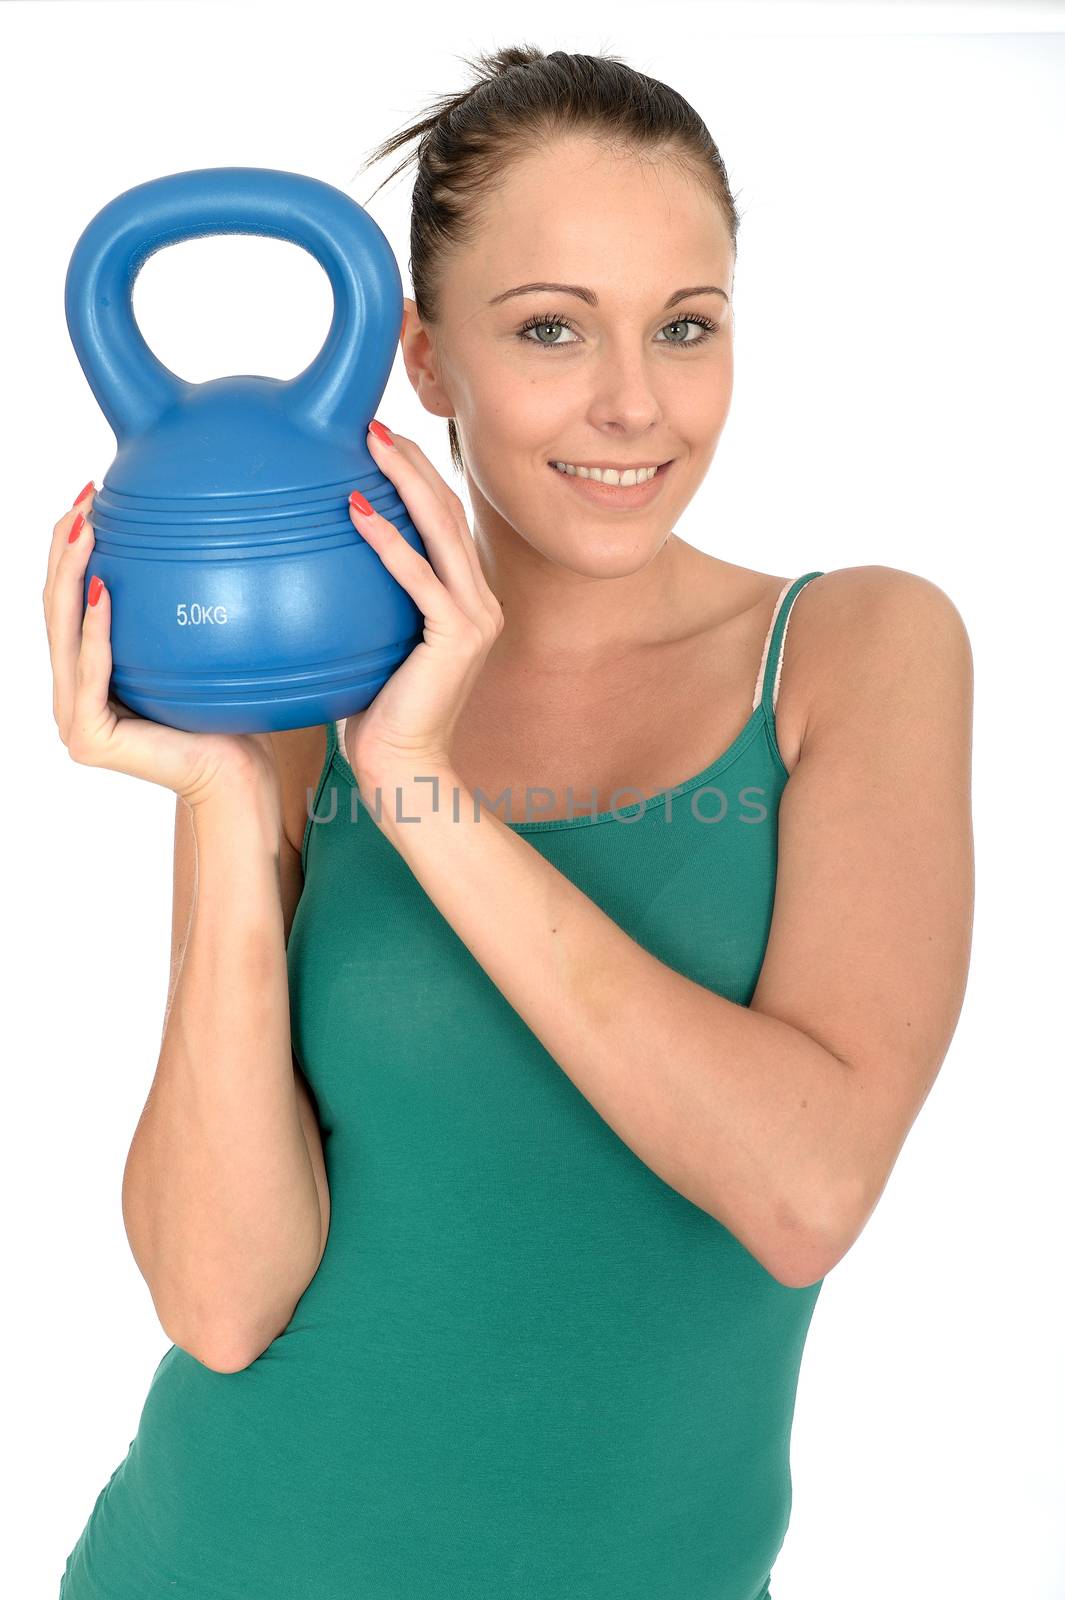 Attractive Healthy Young Woman Working Out Lifting a 5kg Kettle Bell Weight